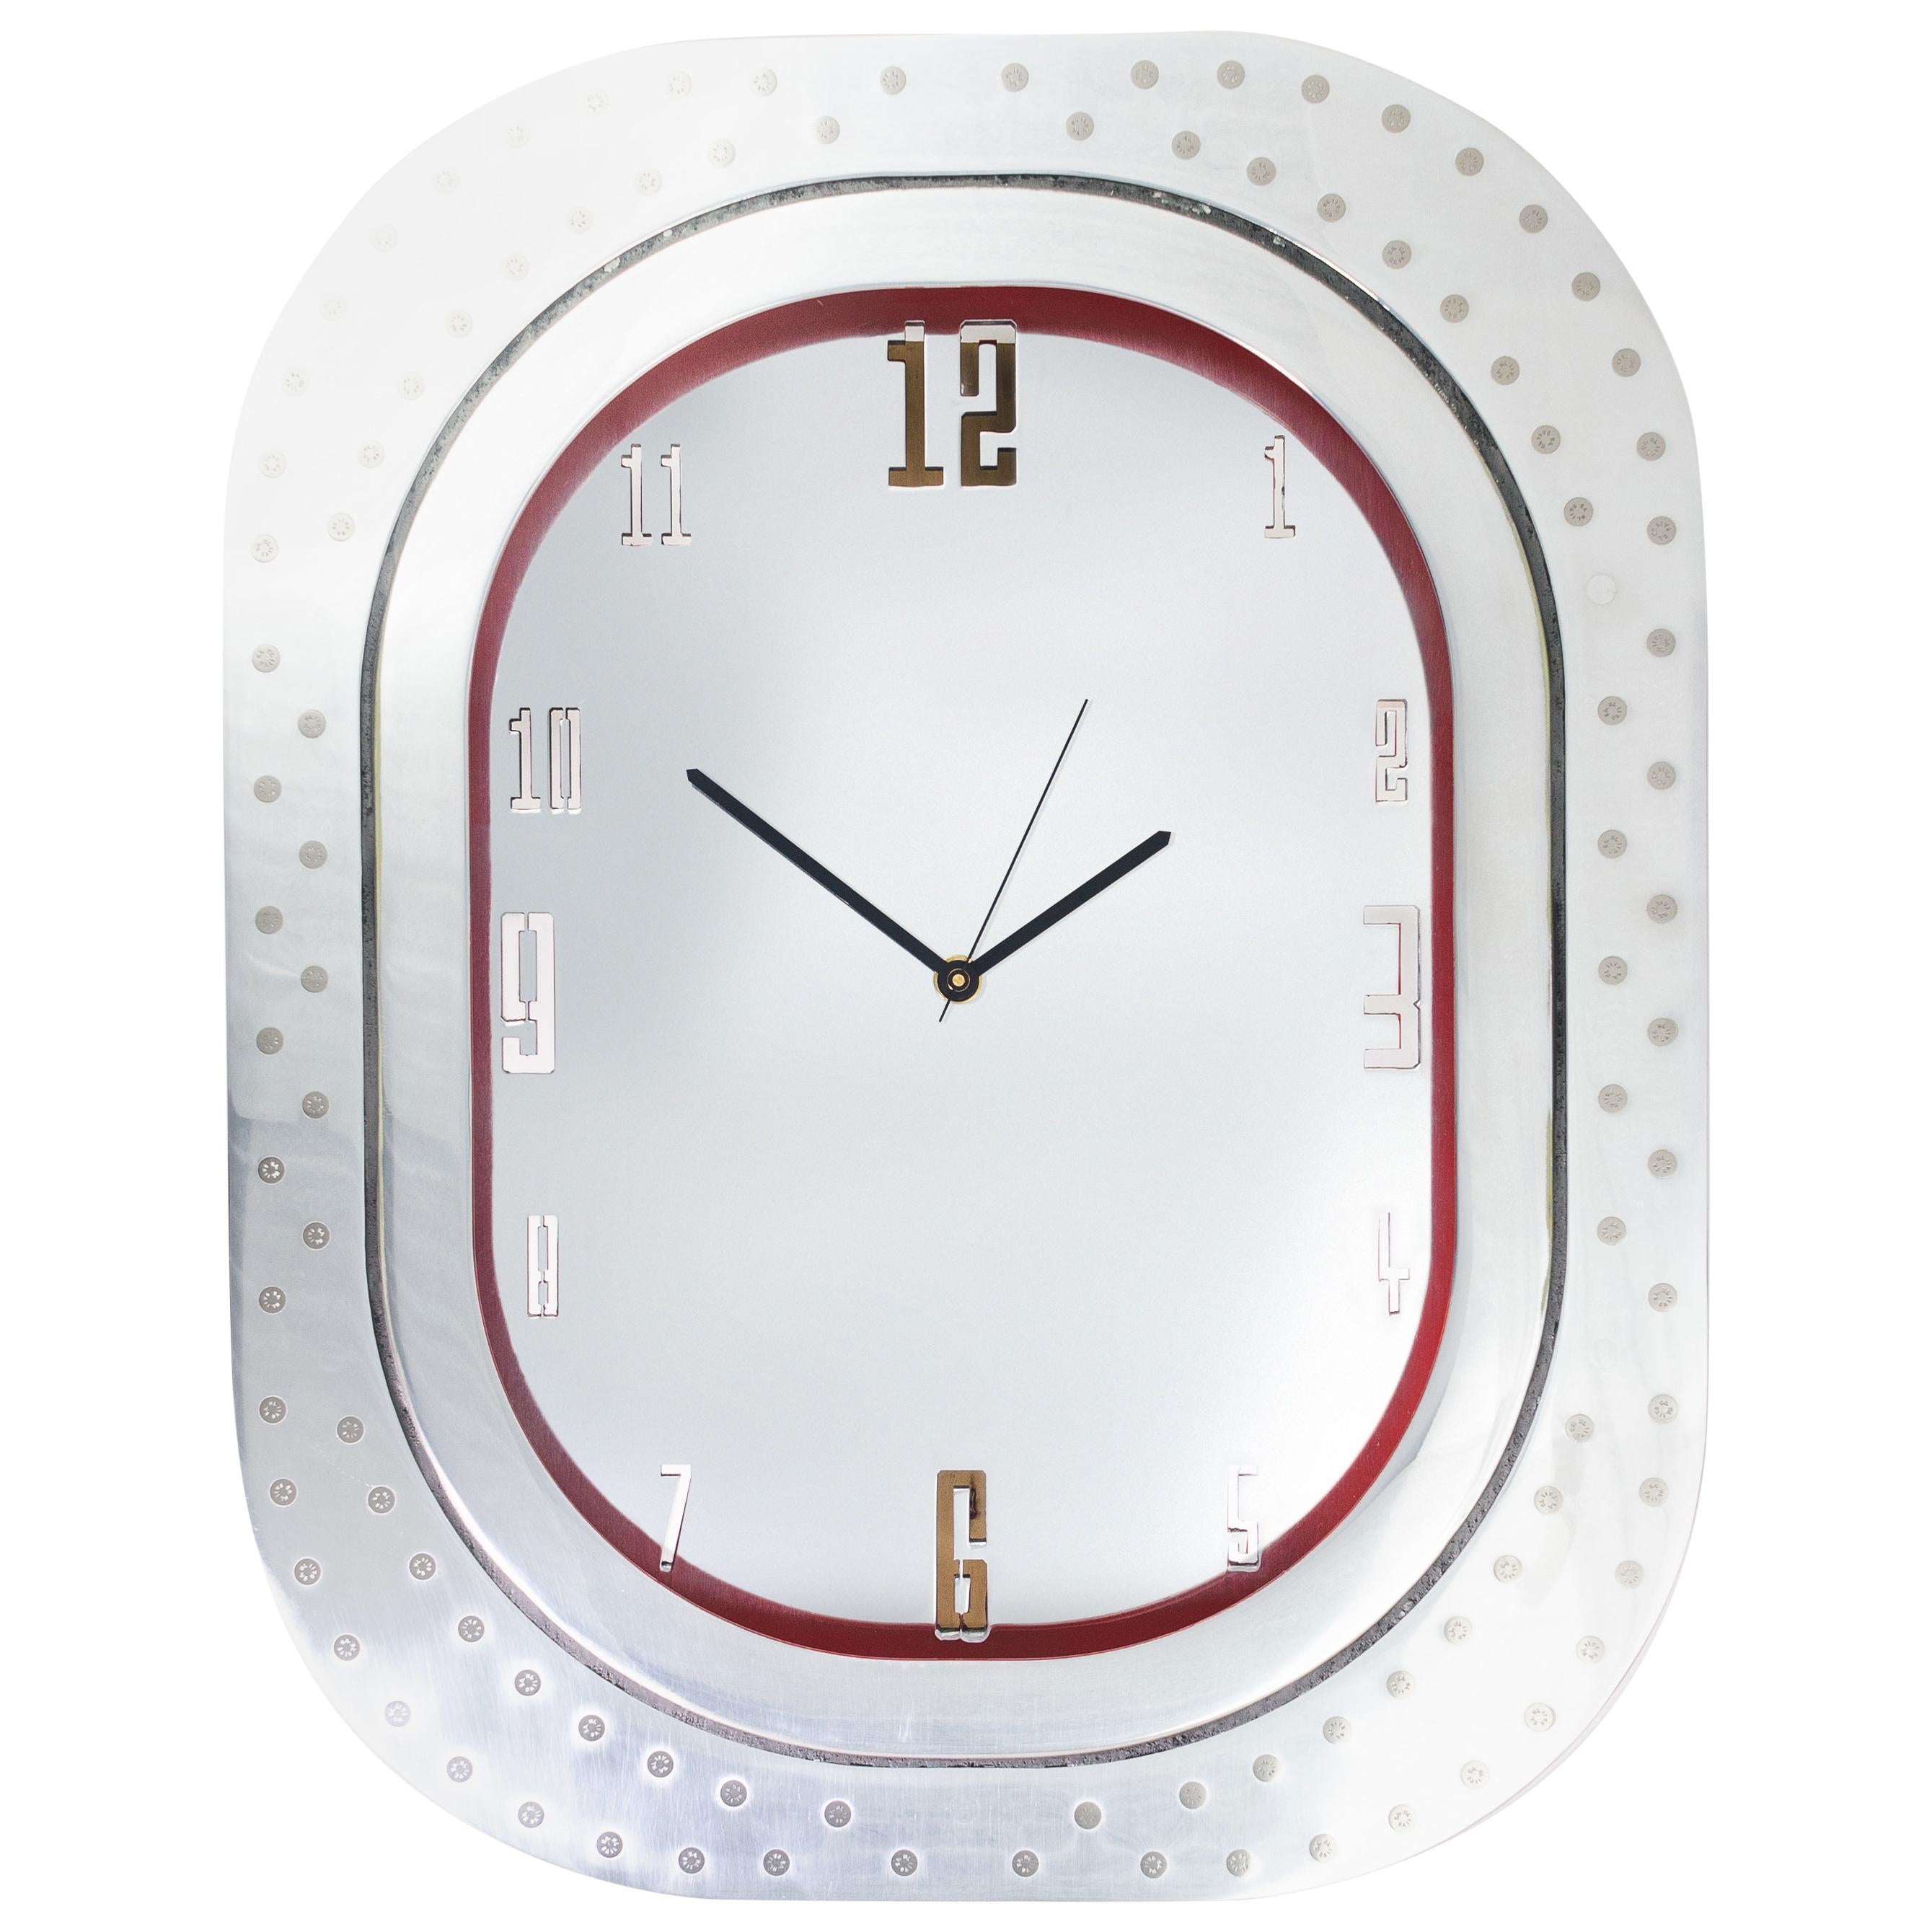 #007-Airbus A320 Window Clock, Polished Aluminium and Polished Face and Red For Sale